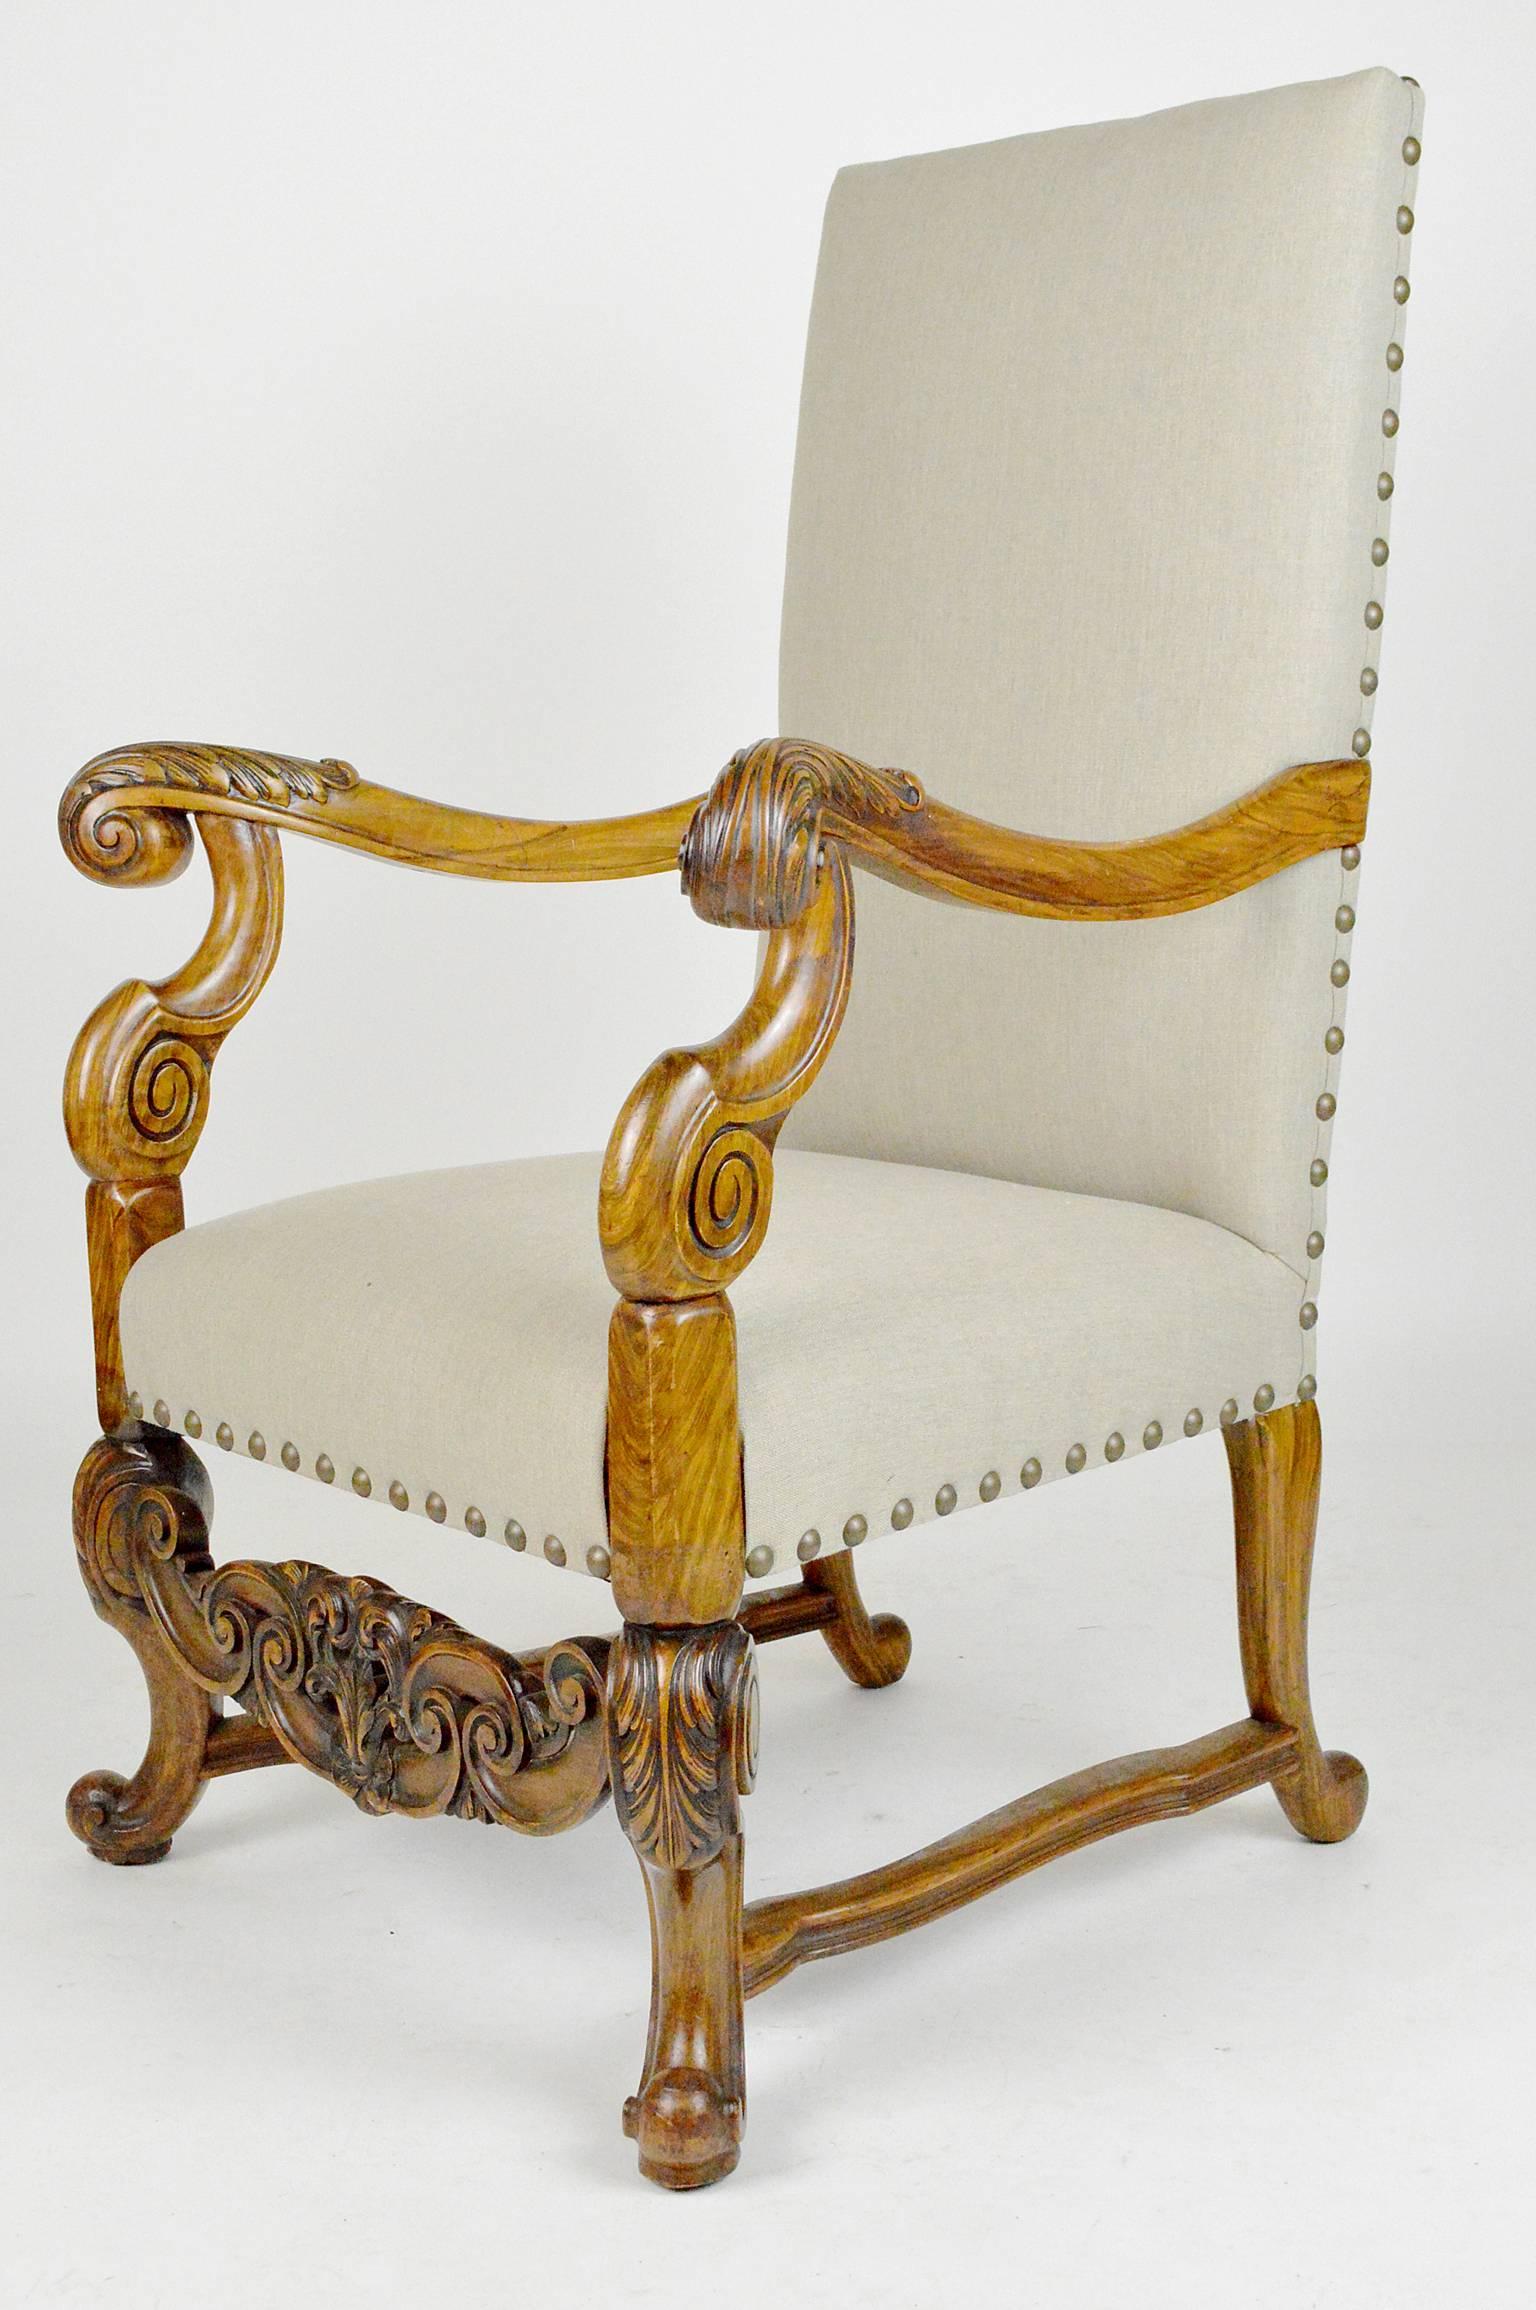 Renaissance revival style carved walnut armchair with lined upholstery.